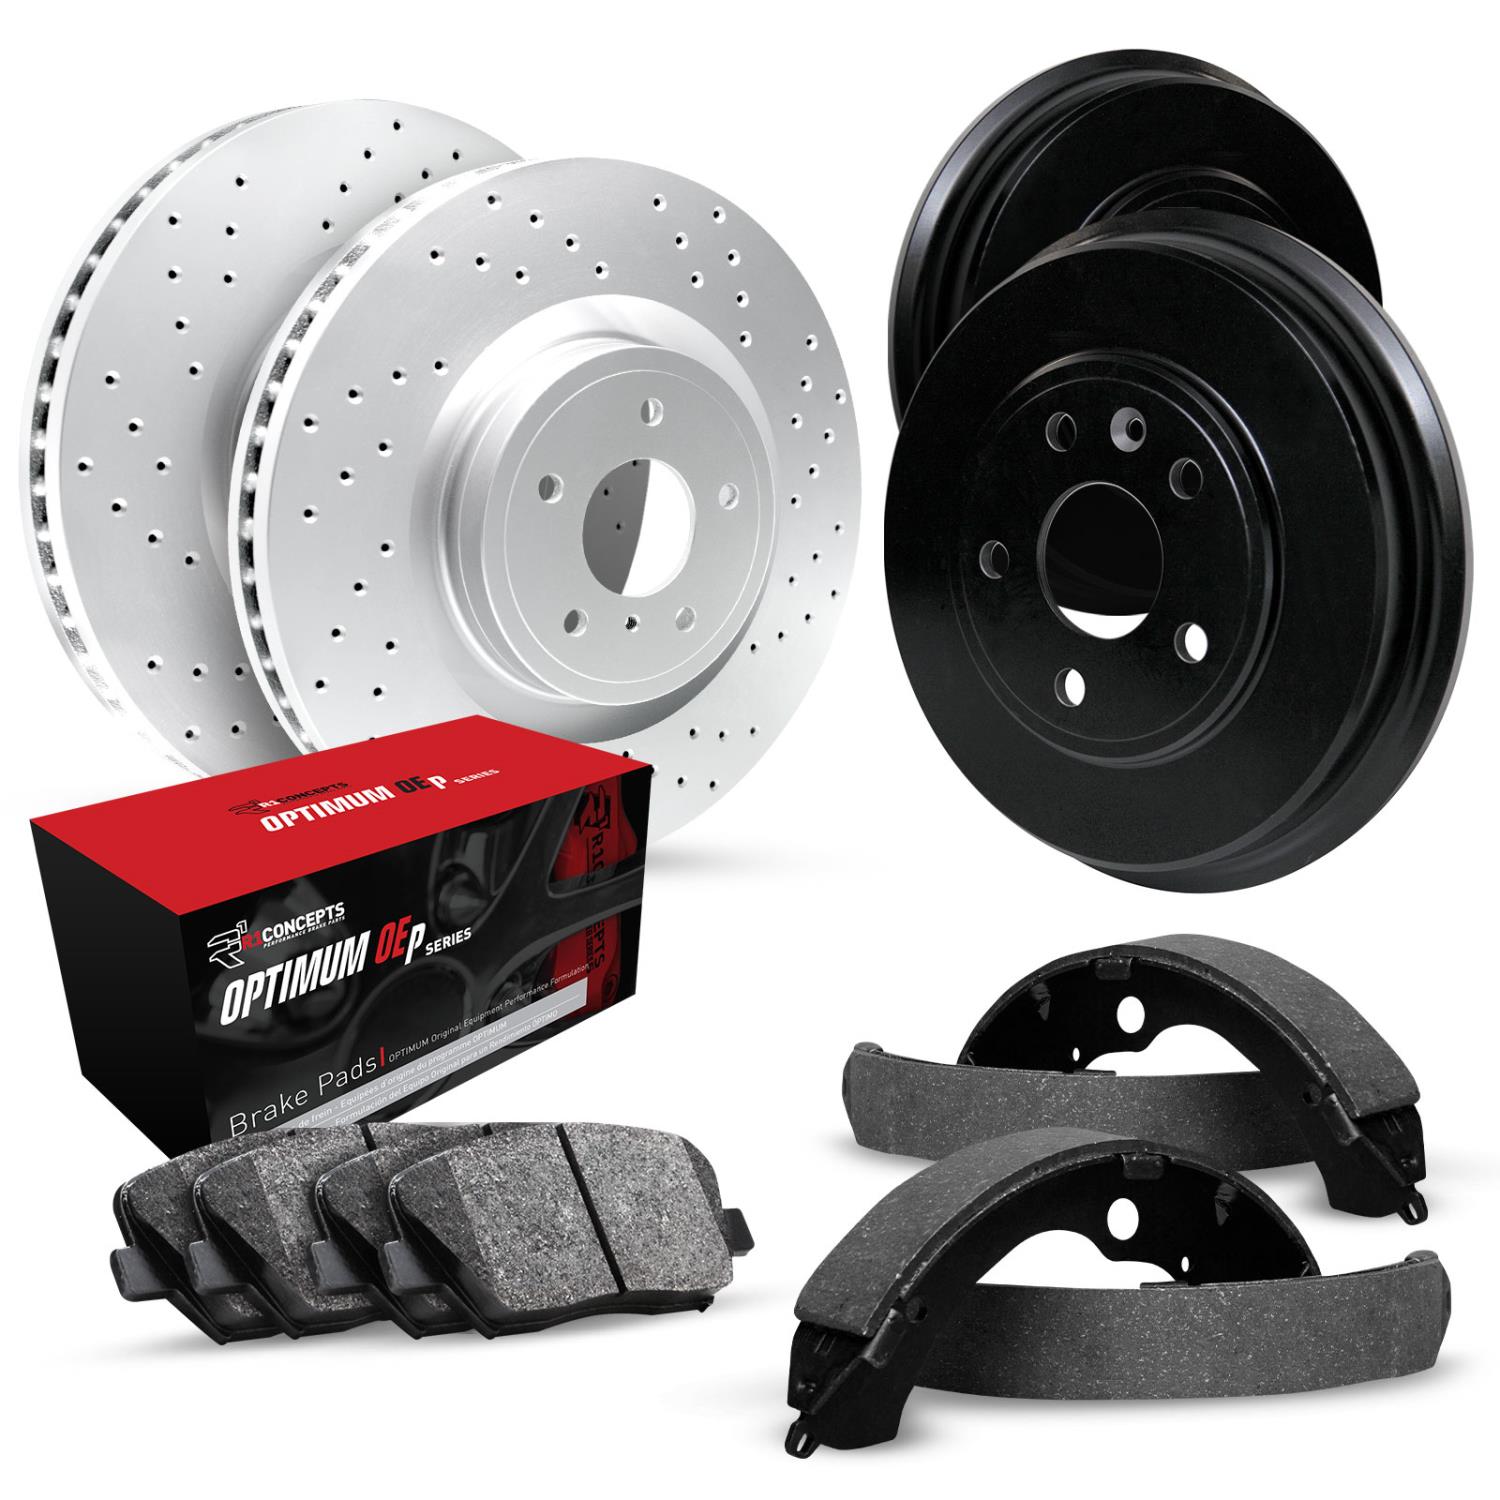 GEO-Carbon Drilled Brake Rotor & Drum Set w/Optimum OE Pads & Shoes, 1988-2000 GM, Position: Front & Rear